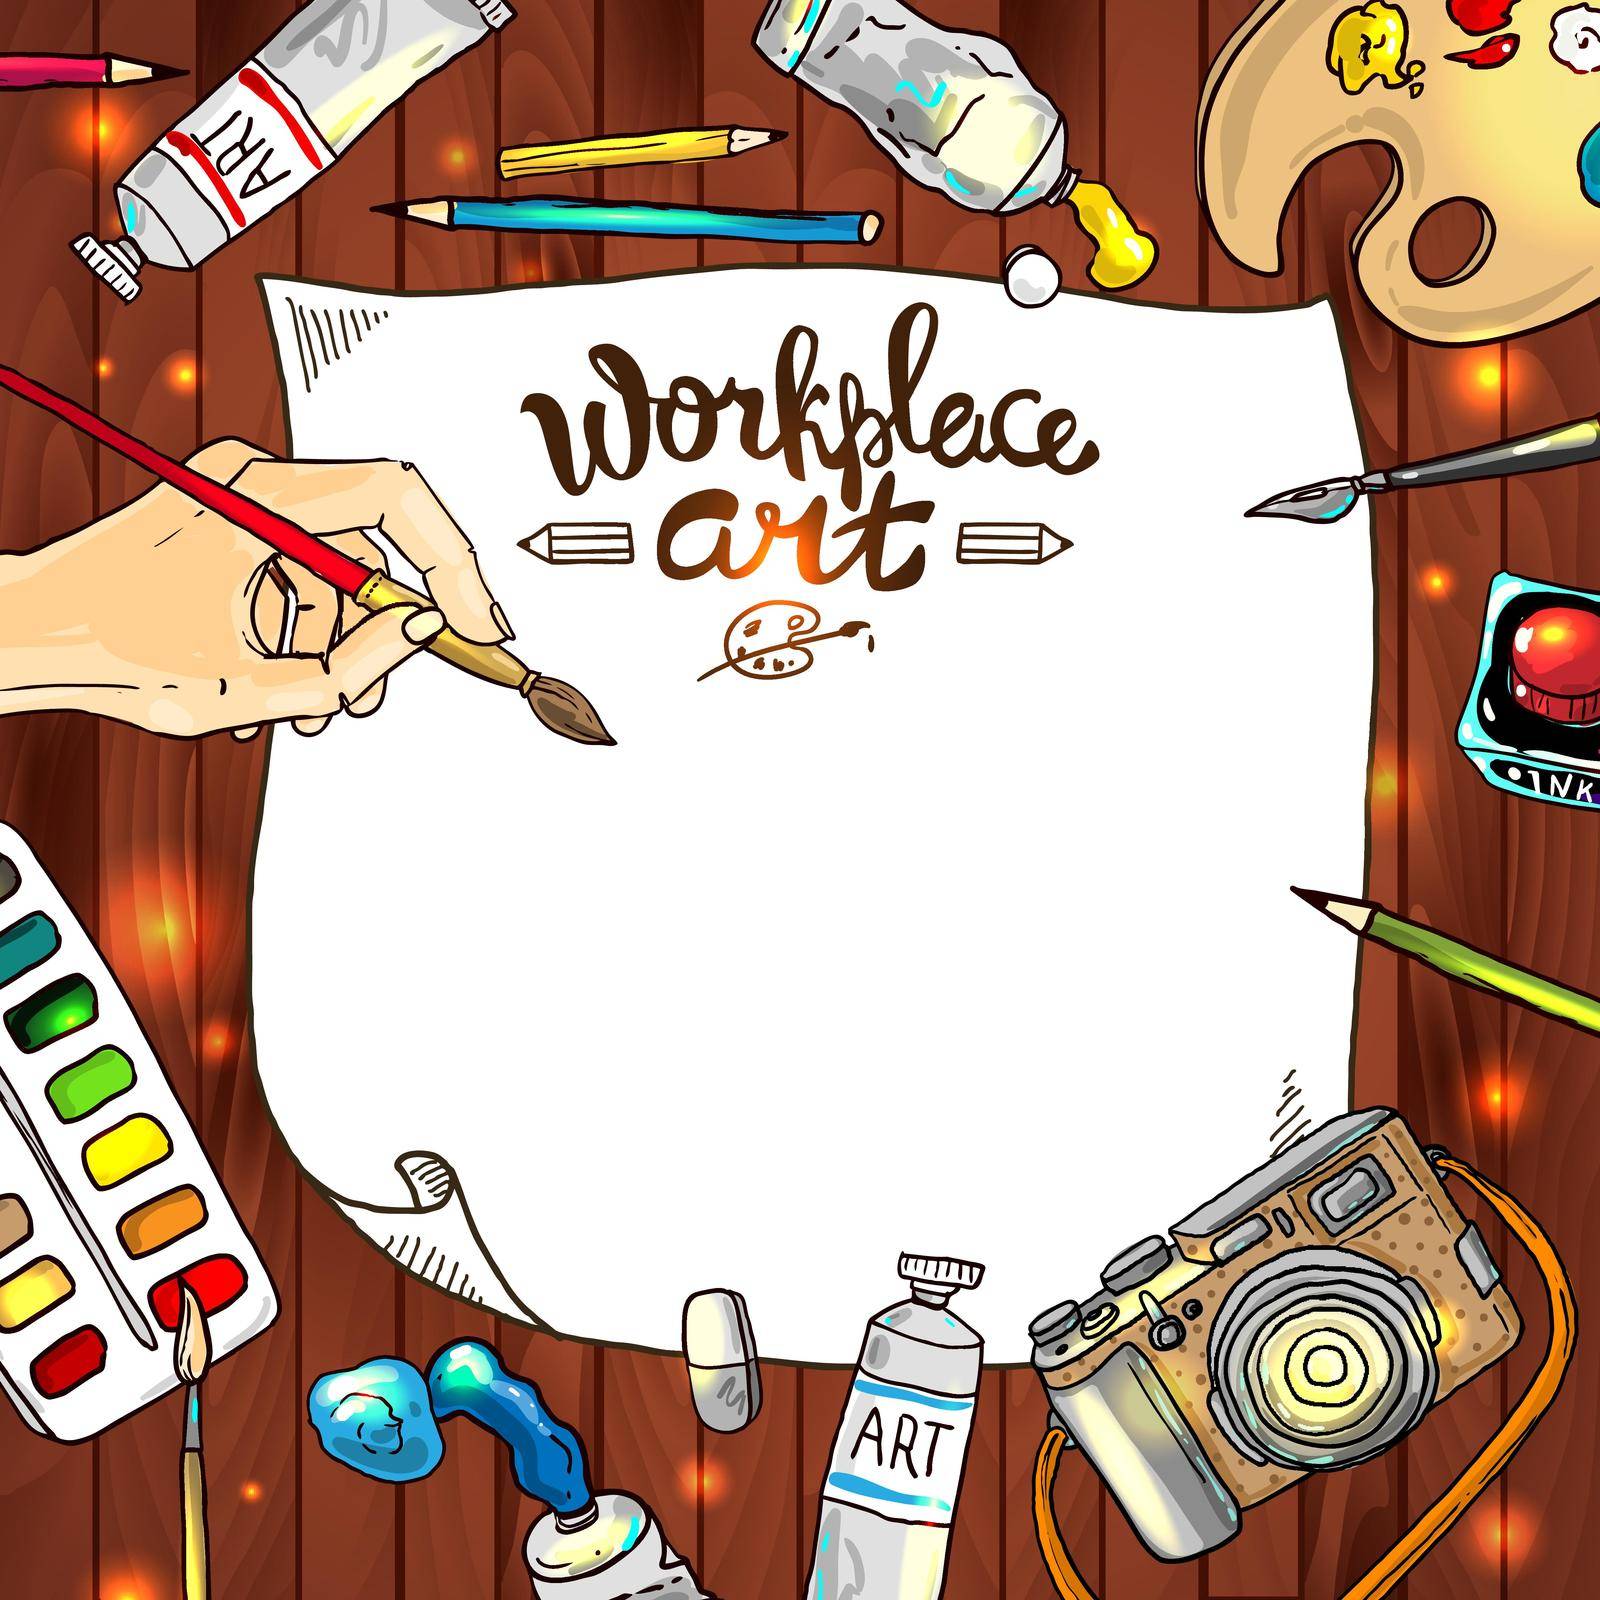 Beautiful hand drawn vector frame workplace art